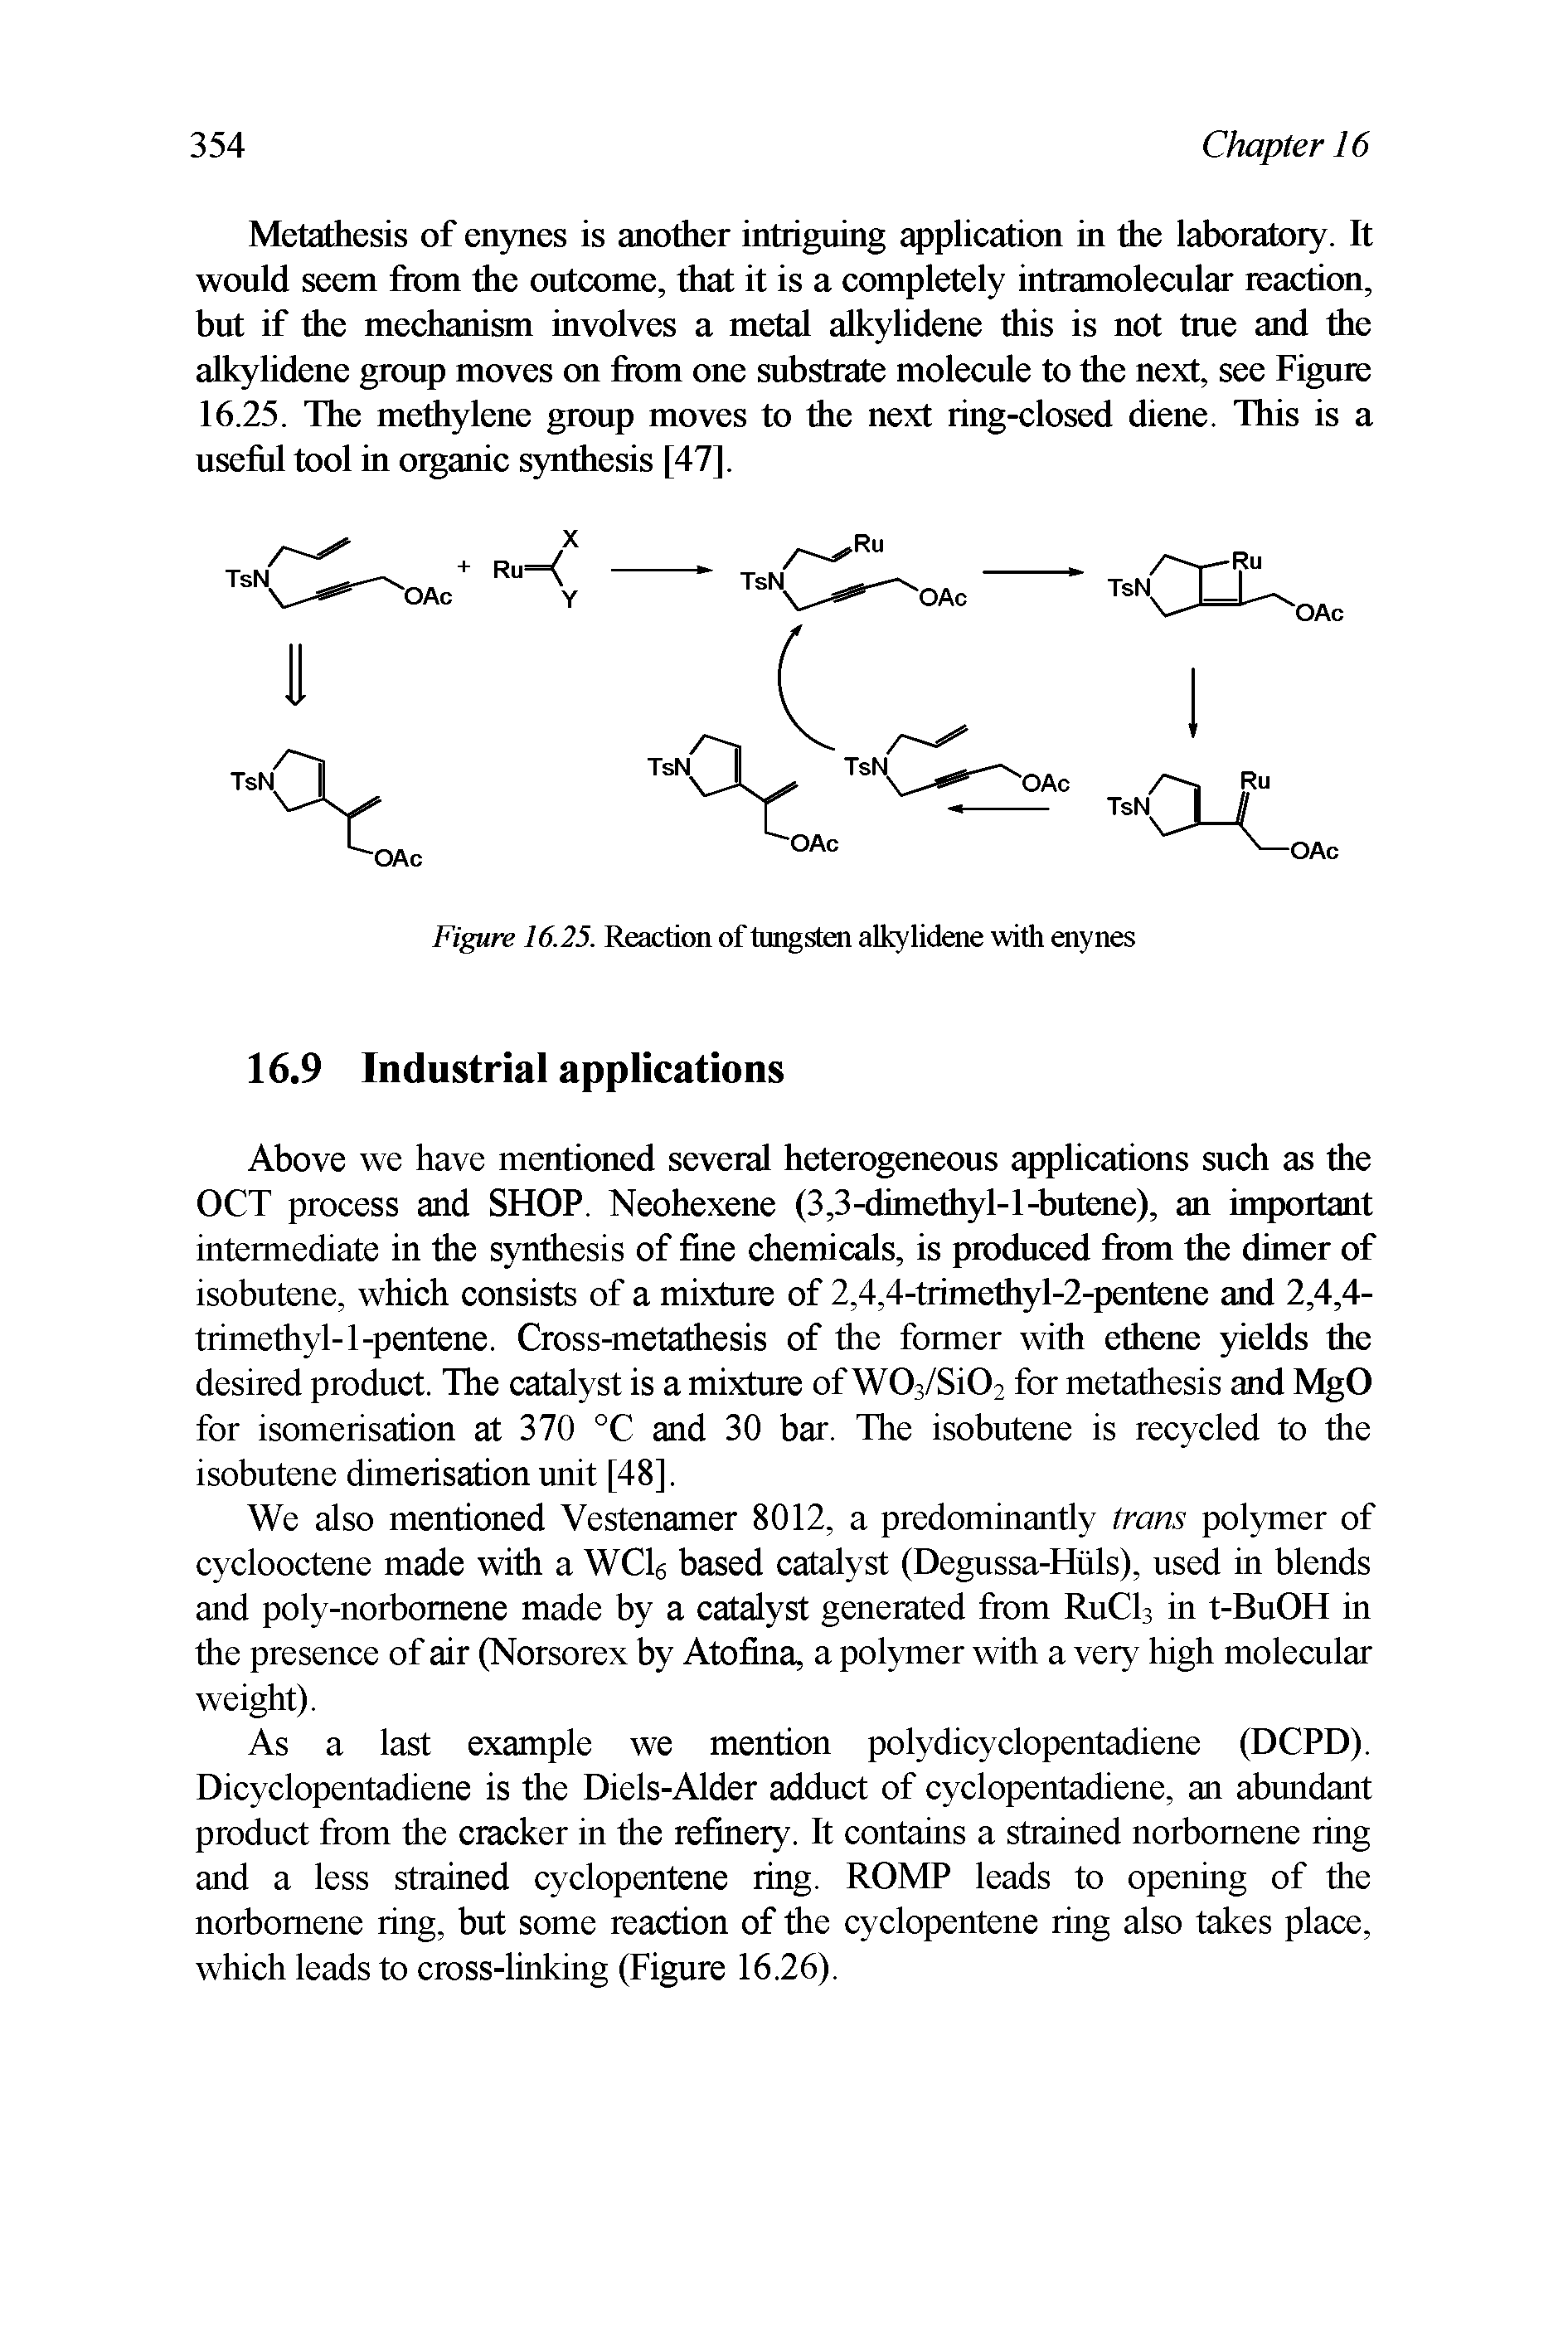 Figure 16.25. Reaction of tungsten alkylidene with enynes...